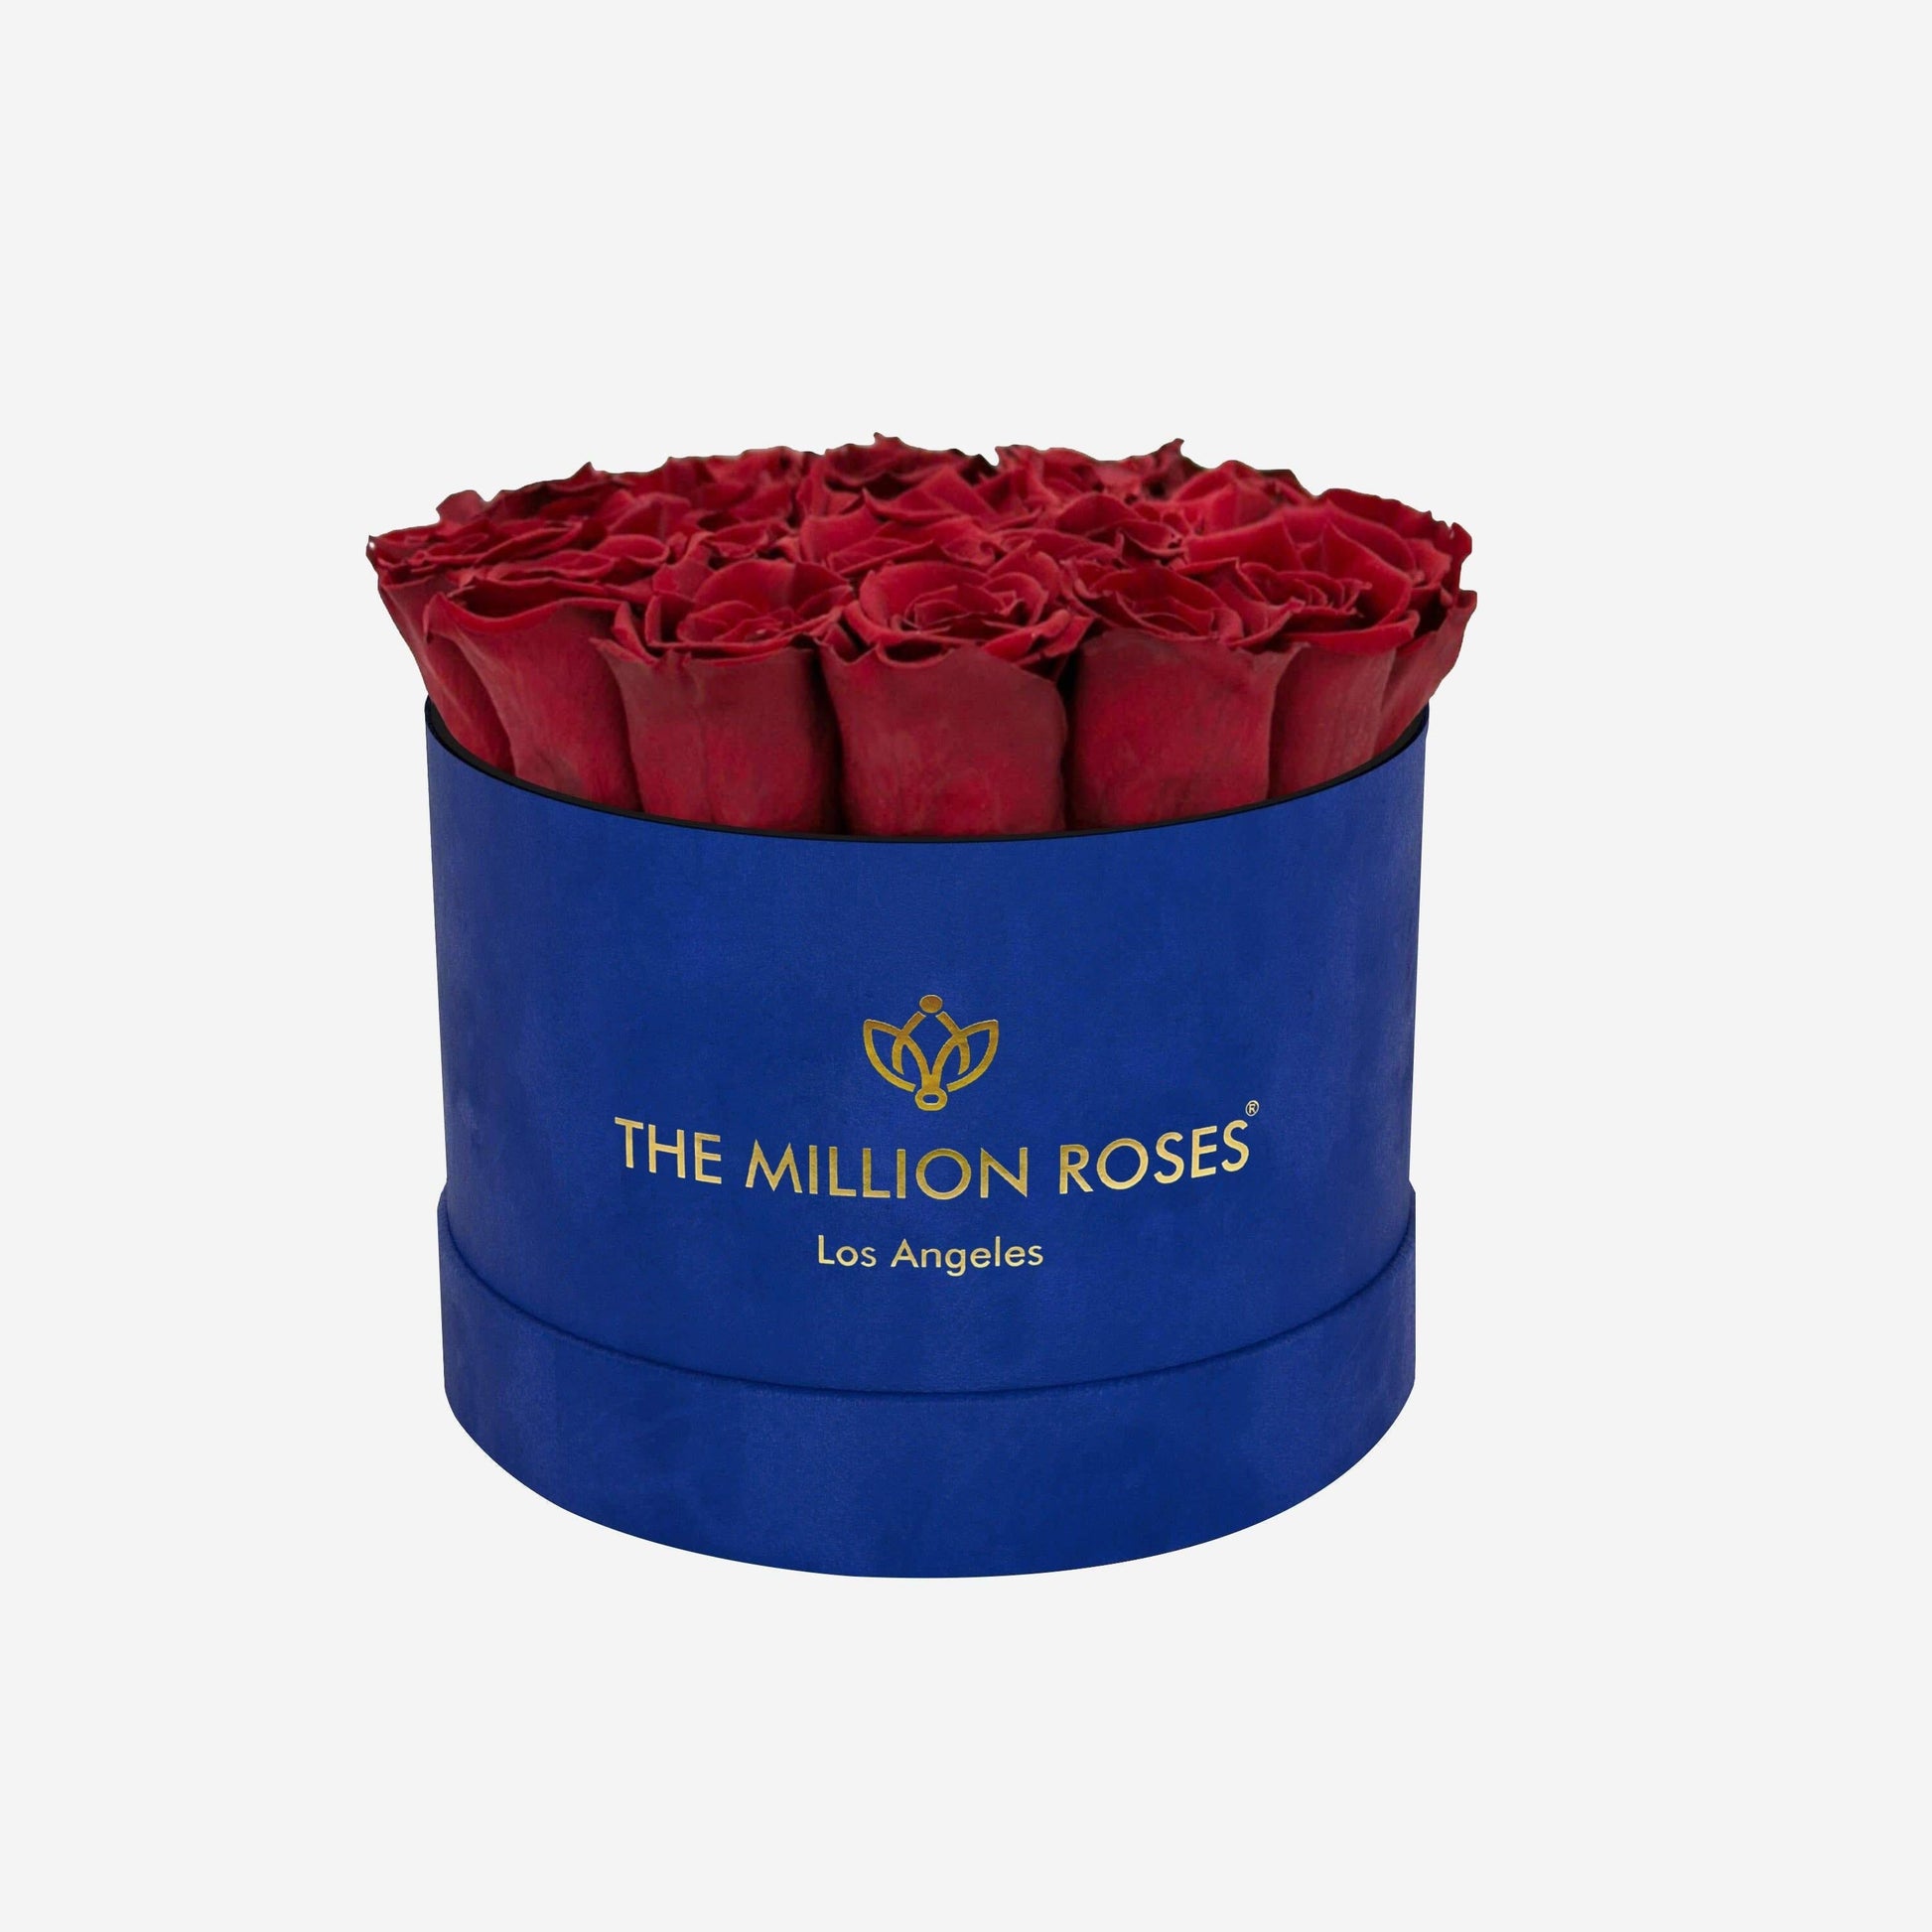 Classic Royal Blue Suede Box | Red Roses - The Million Roses